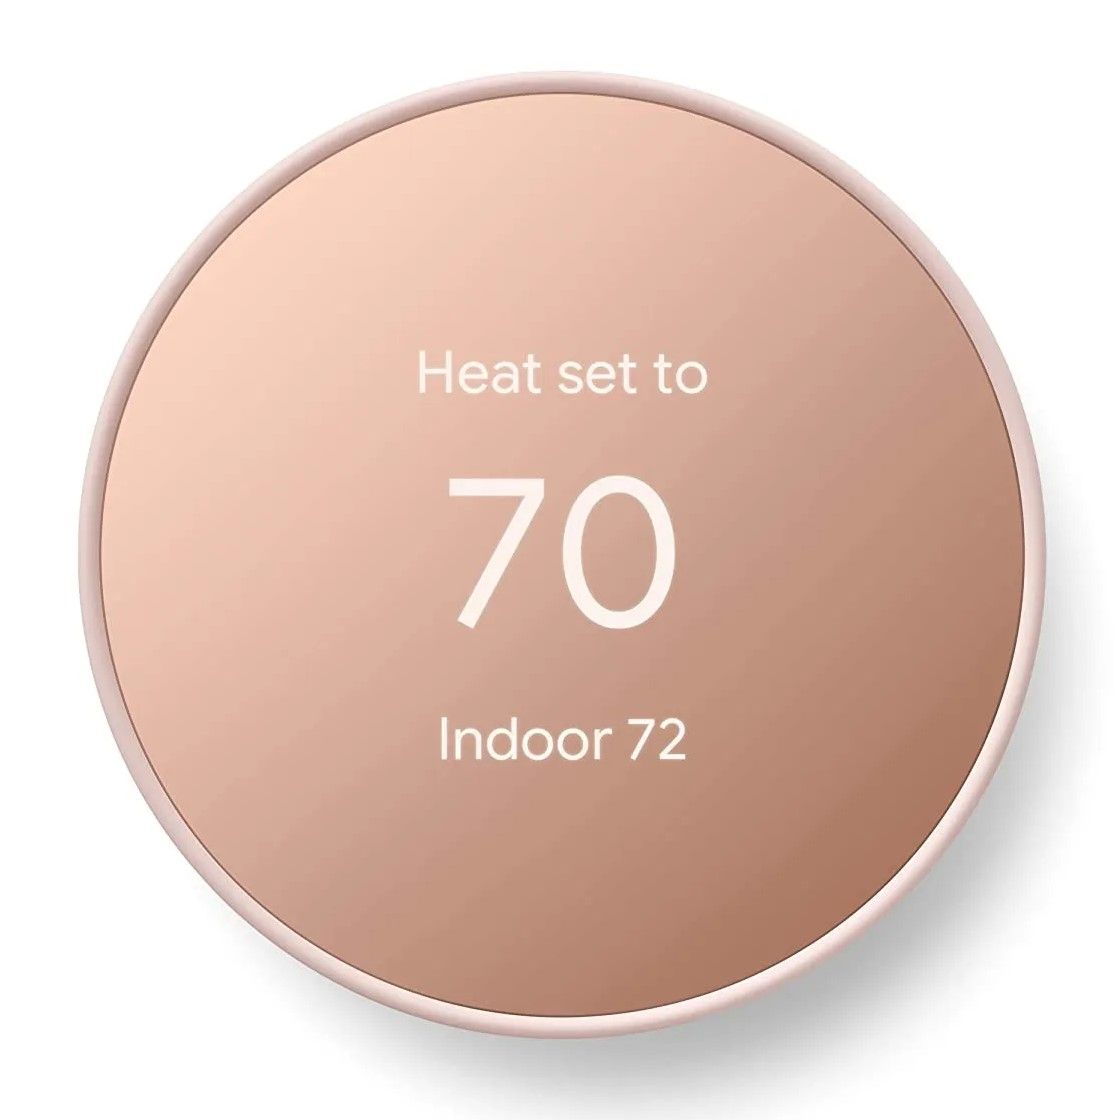 Google Nest Thermostat with temperature information displayed